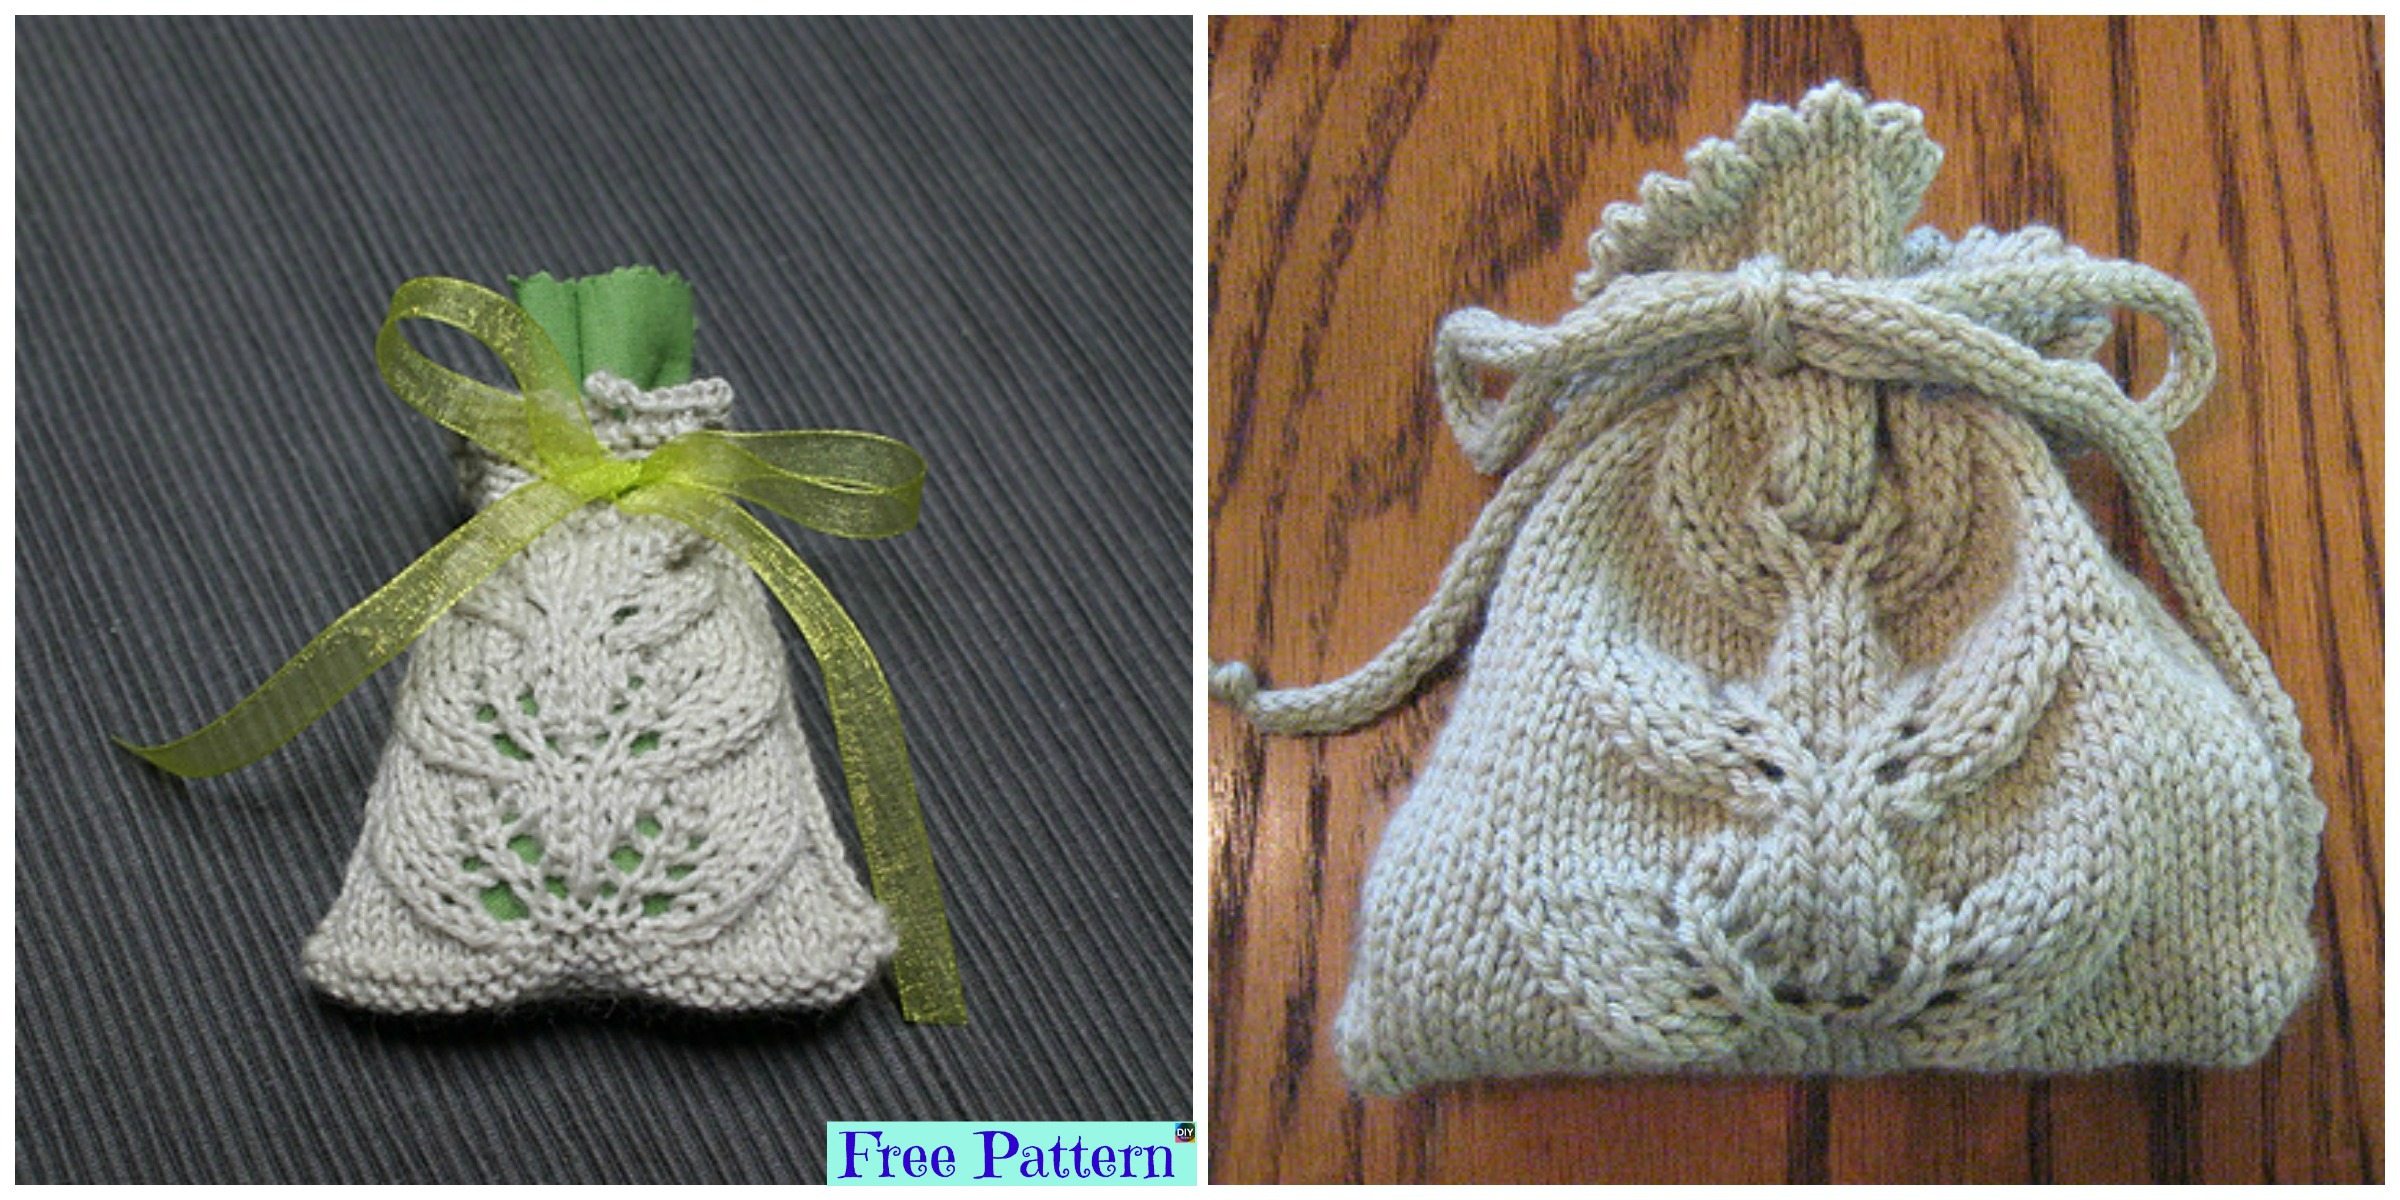 diy4ever- Knit Small Lace Bag - Free Pattern